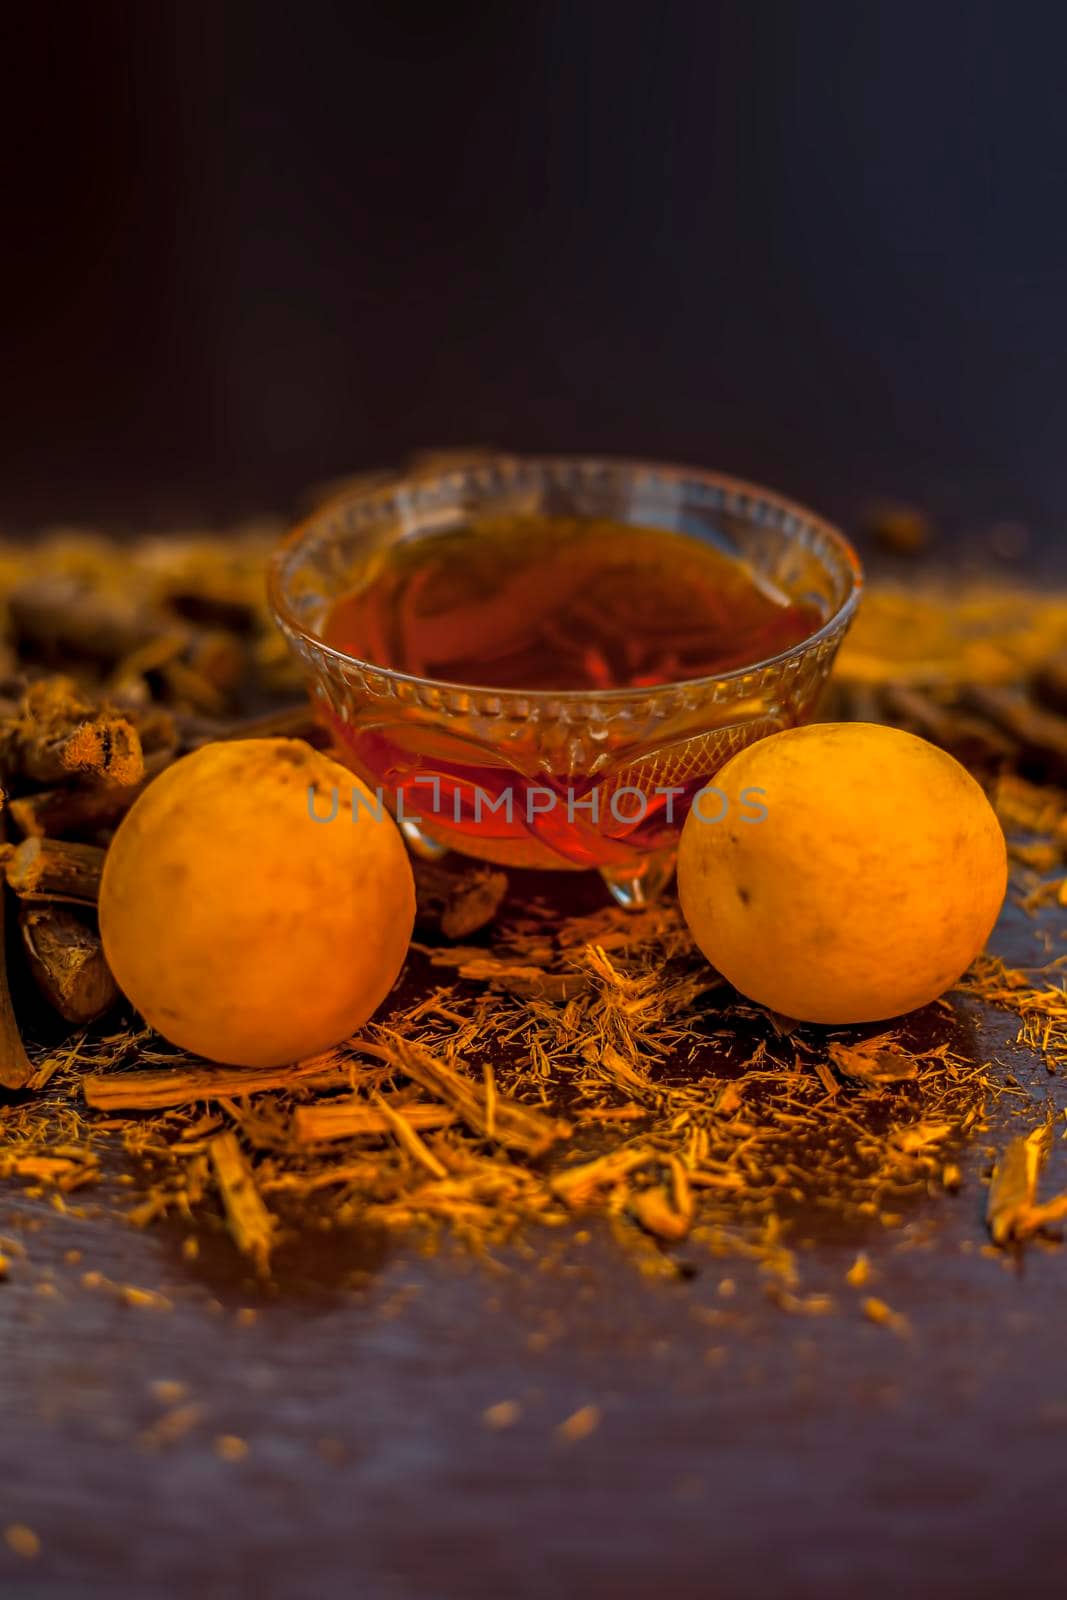 Best ayurvedic skin whitening face mask on brown colored surface with warm colors consisting of licorice, lemon juice, and honey. Shot of mulethi, honey, and lemons on the surface, by mirzamlk